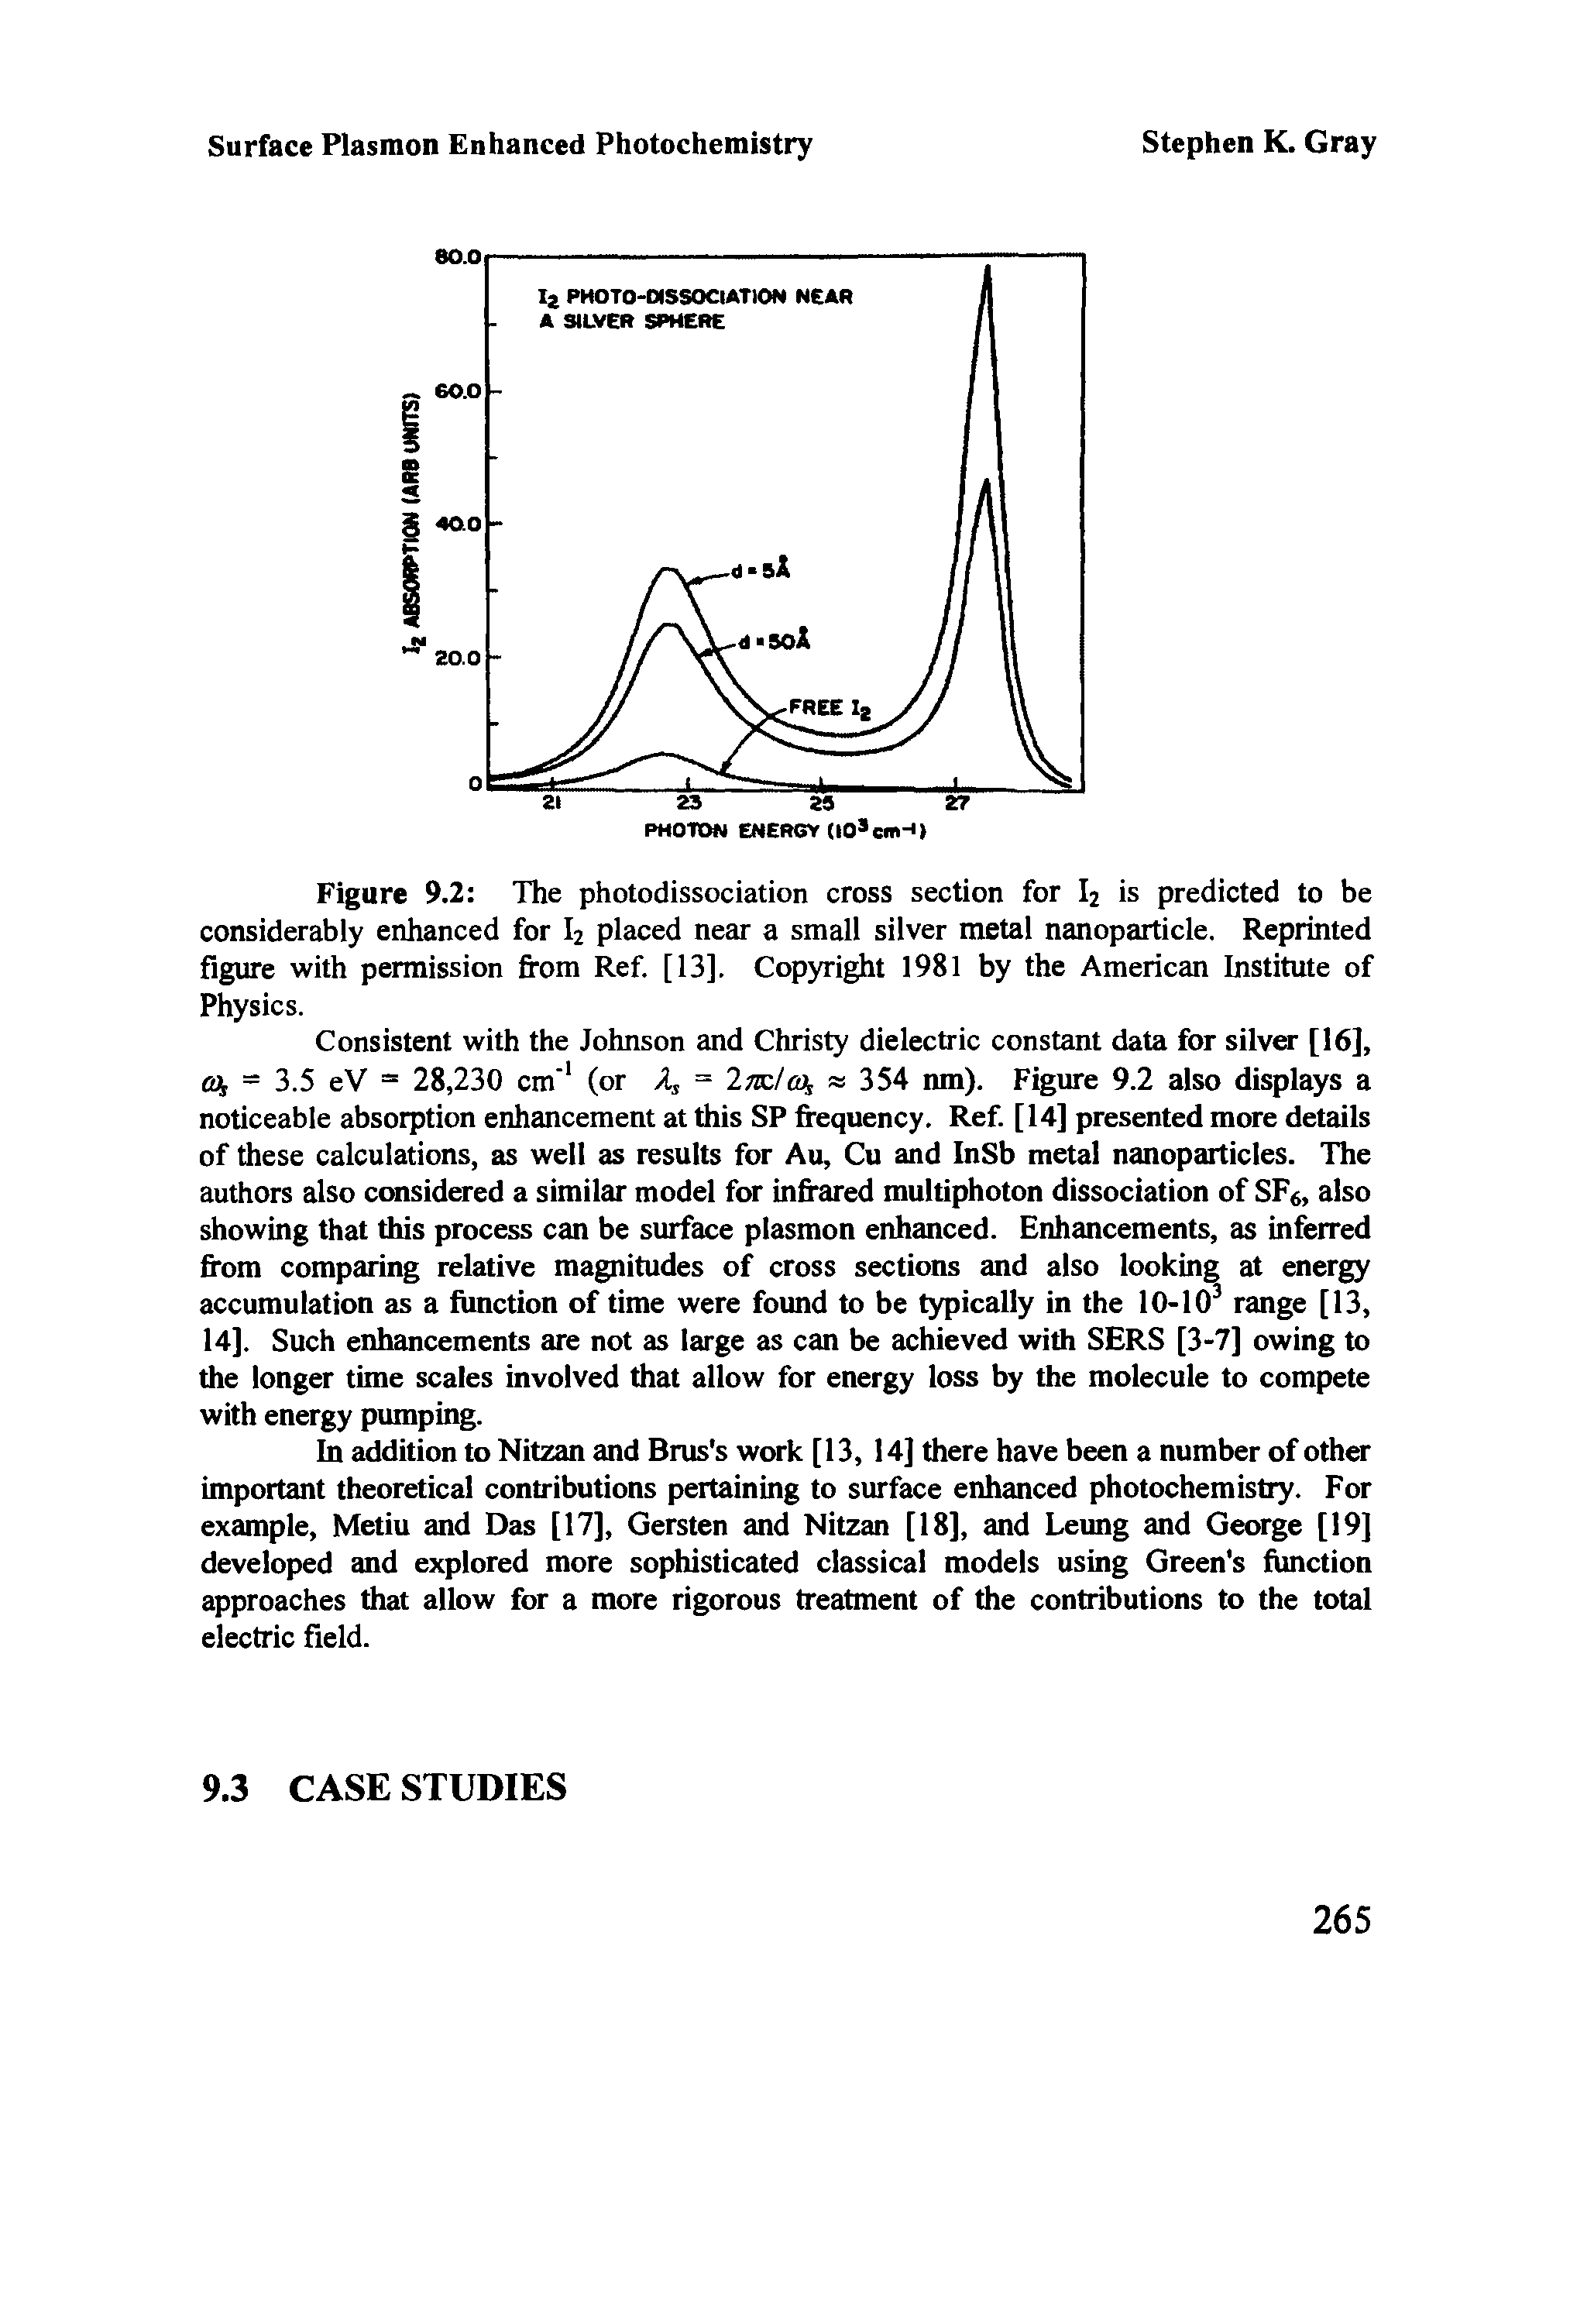 Figure 9.2 The photodissociation cross section for I2 is predicted to be considerably enhanced for I2 placed near a small silver metal nanoparticle. Reprinted figure with permission from Ref. [13]. Copyright I98l by the American Institute of Physics.